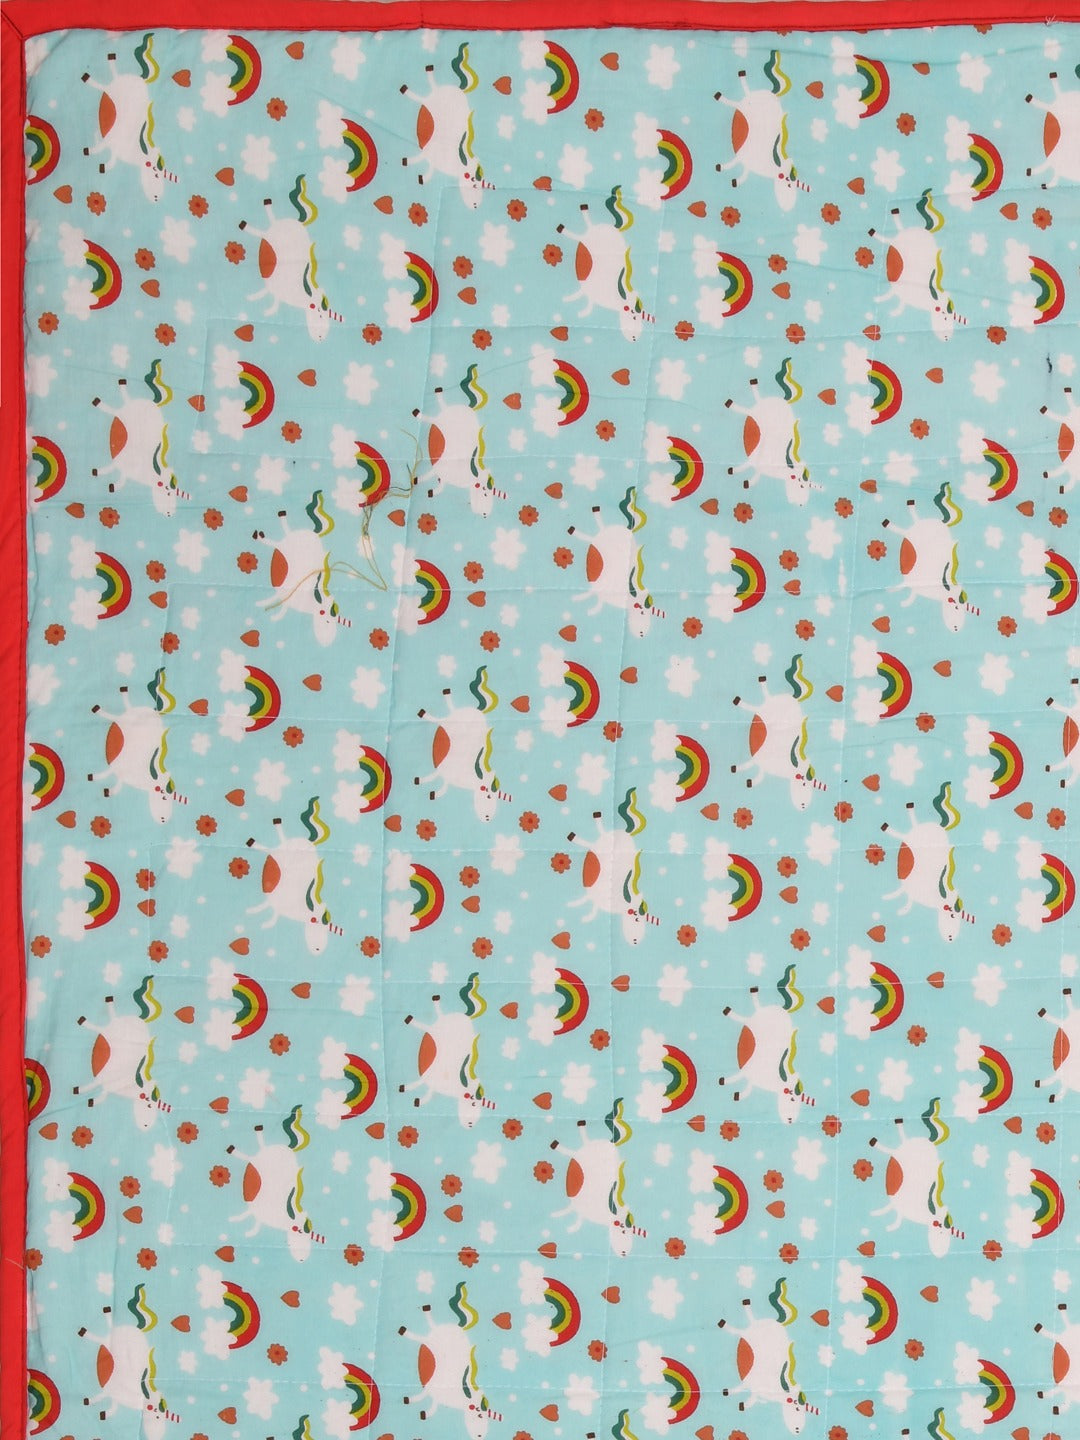 Cotton Reversible Kids Dohar/AC Blanket - 40X60 Inches